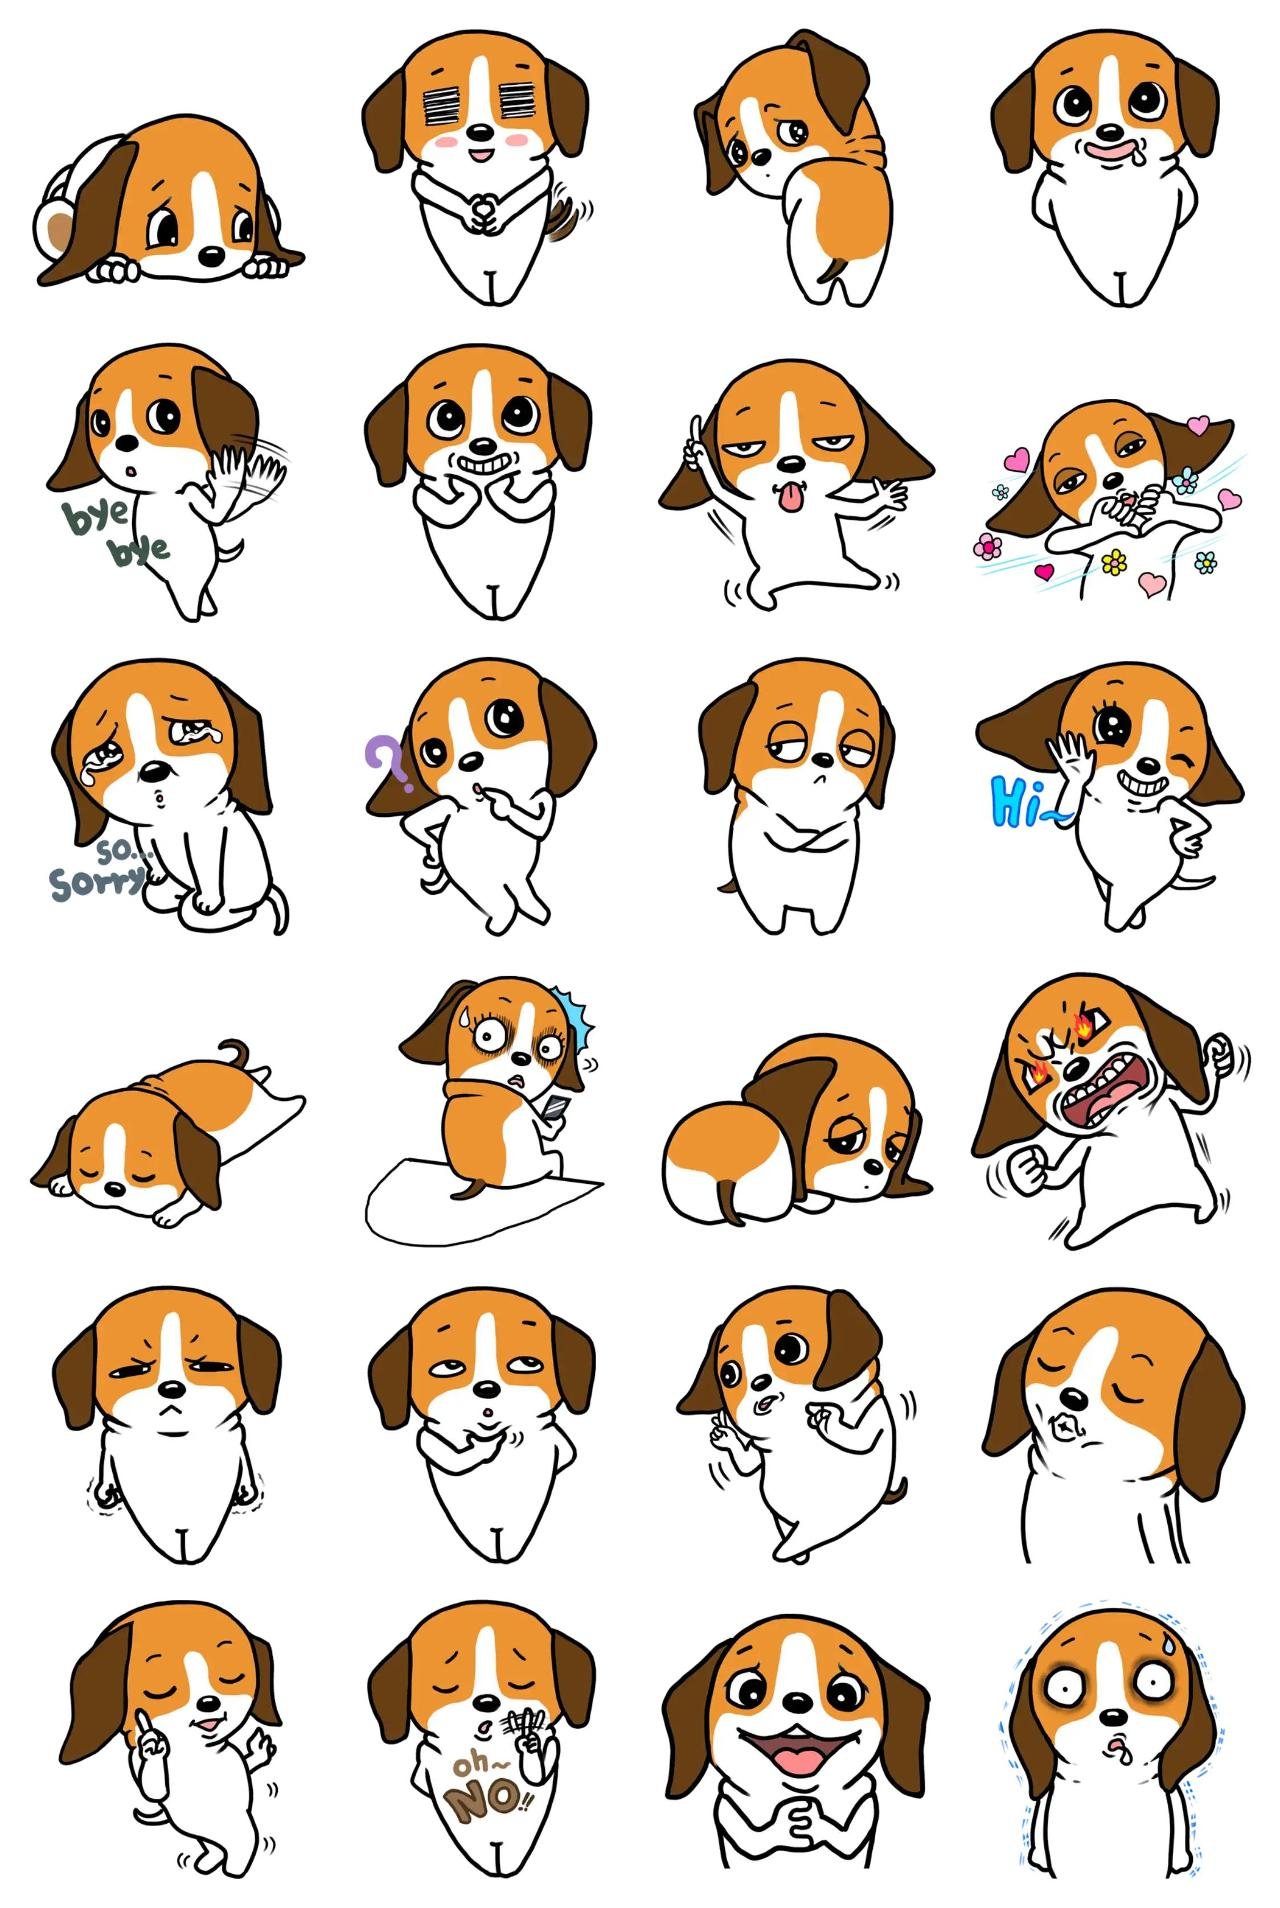 Waldo the Beagle Animals sticker pack for Whatsapp, Telegram, Signal, and others chatting and message apps